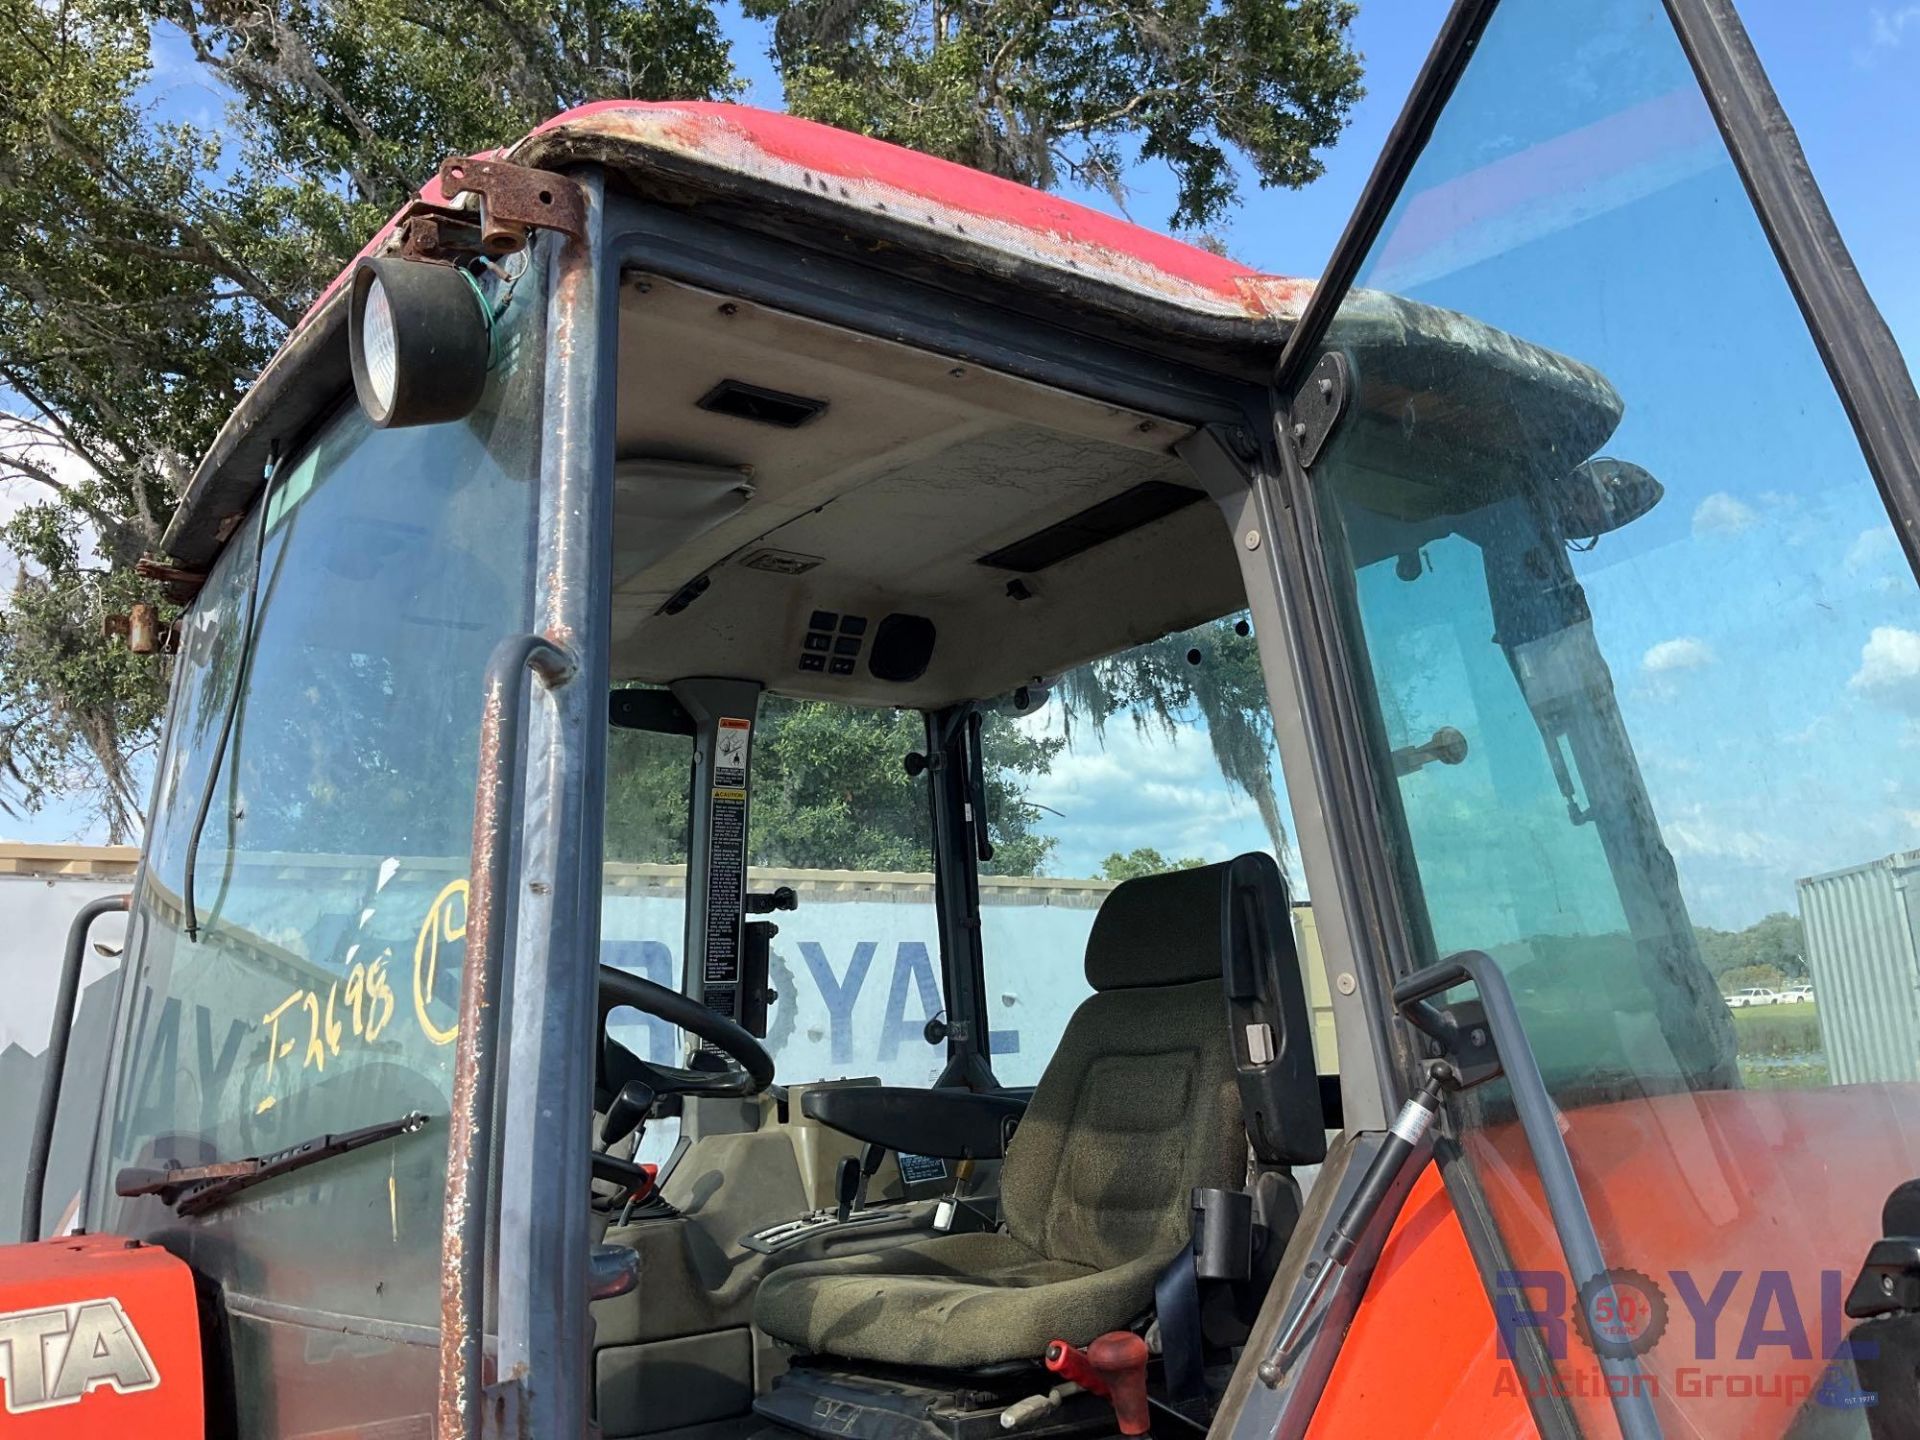 2013 Kubota Tractor M108S 4x4 Agricultural Tractor - Image 23 of 27